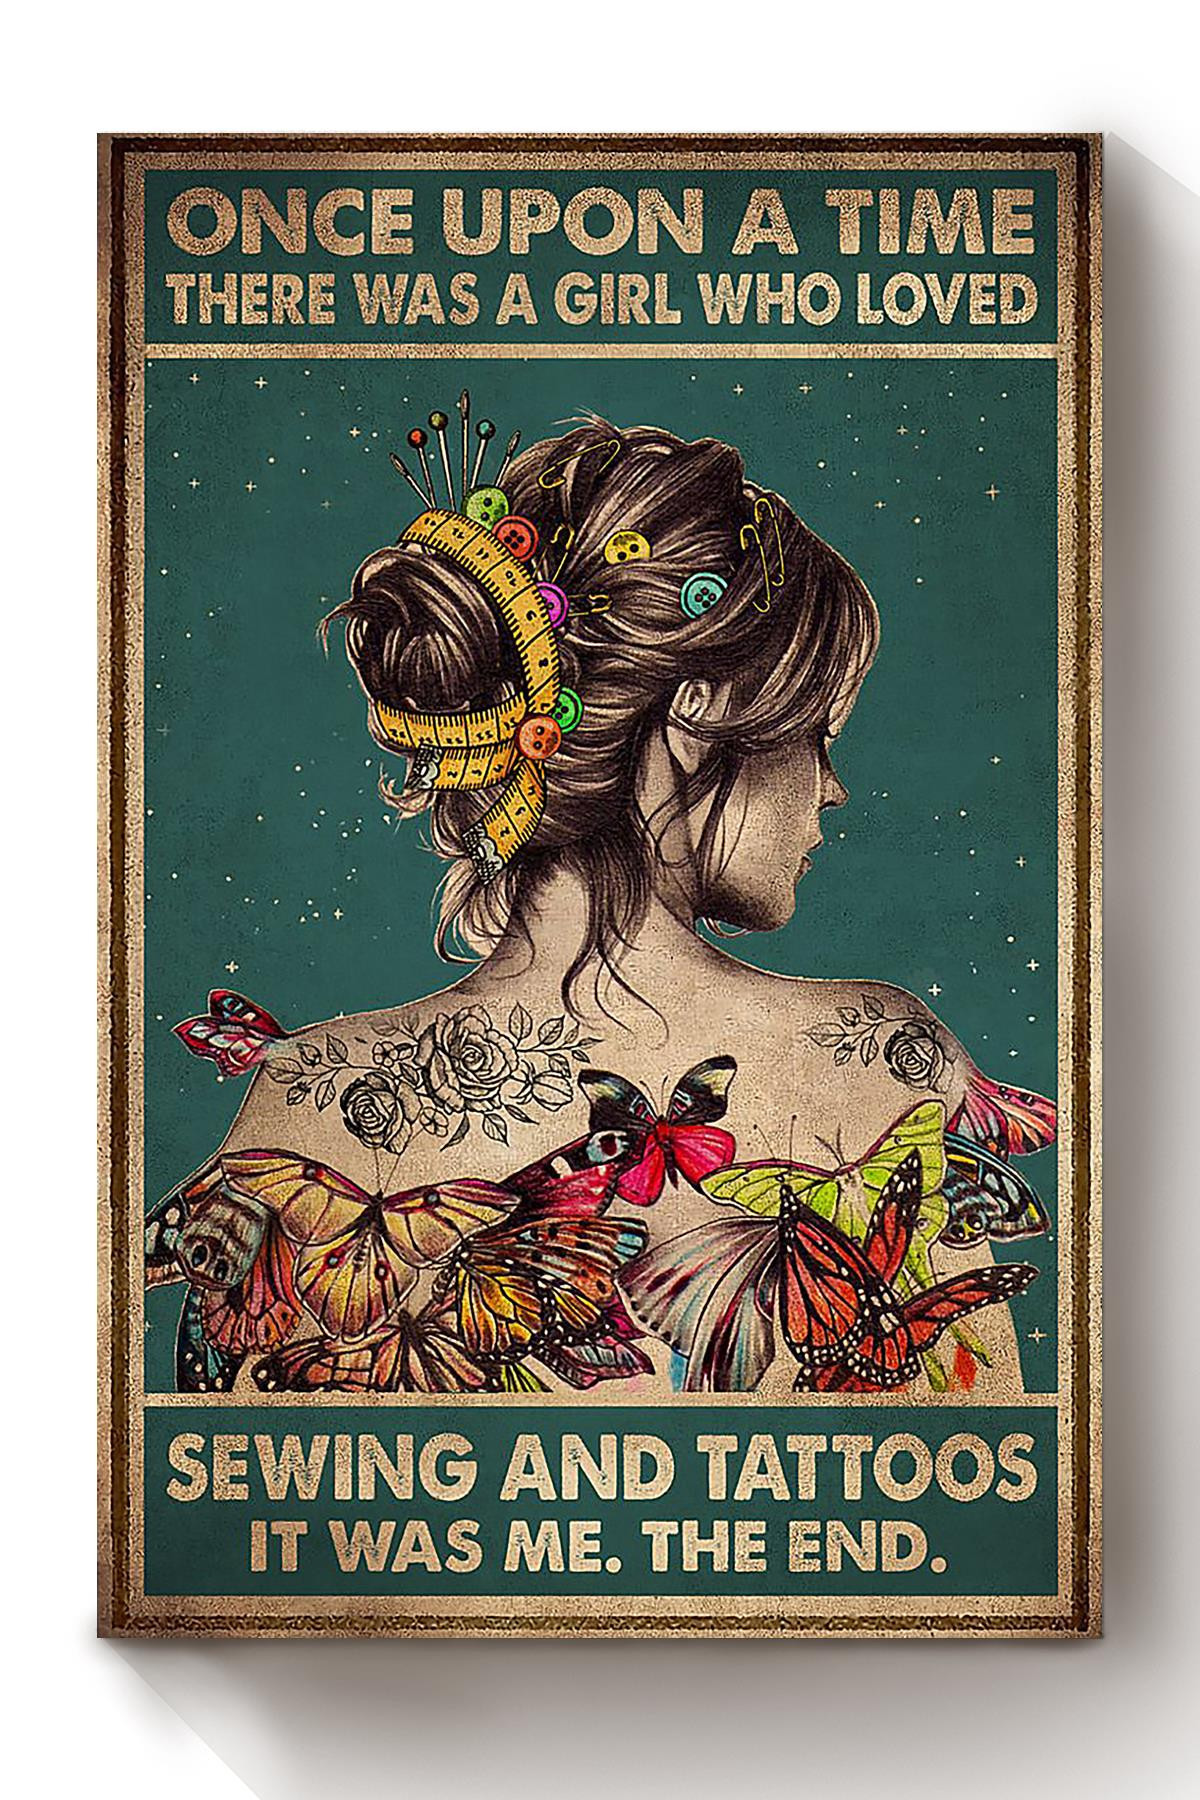 Once Upon A Time Girl Loved Sewing And Tattoos Gift For Tattoo Artist Sewer Quilter Metal Sewing Lover Canvas Wrapped Canvas 8x10